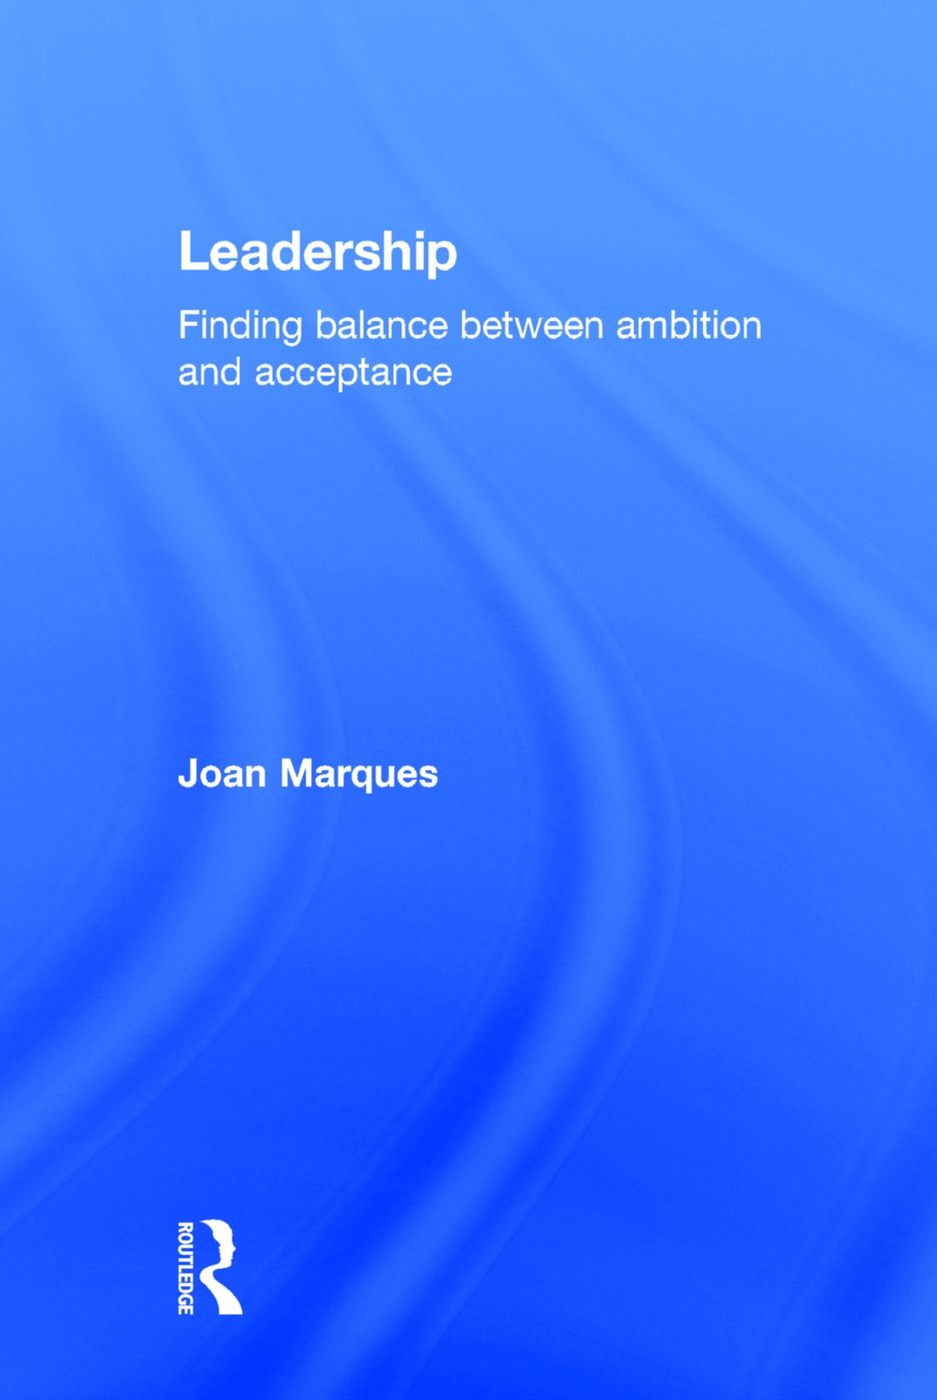 Leadership: Finding Balance Between Ambition and Acceptance